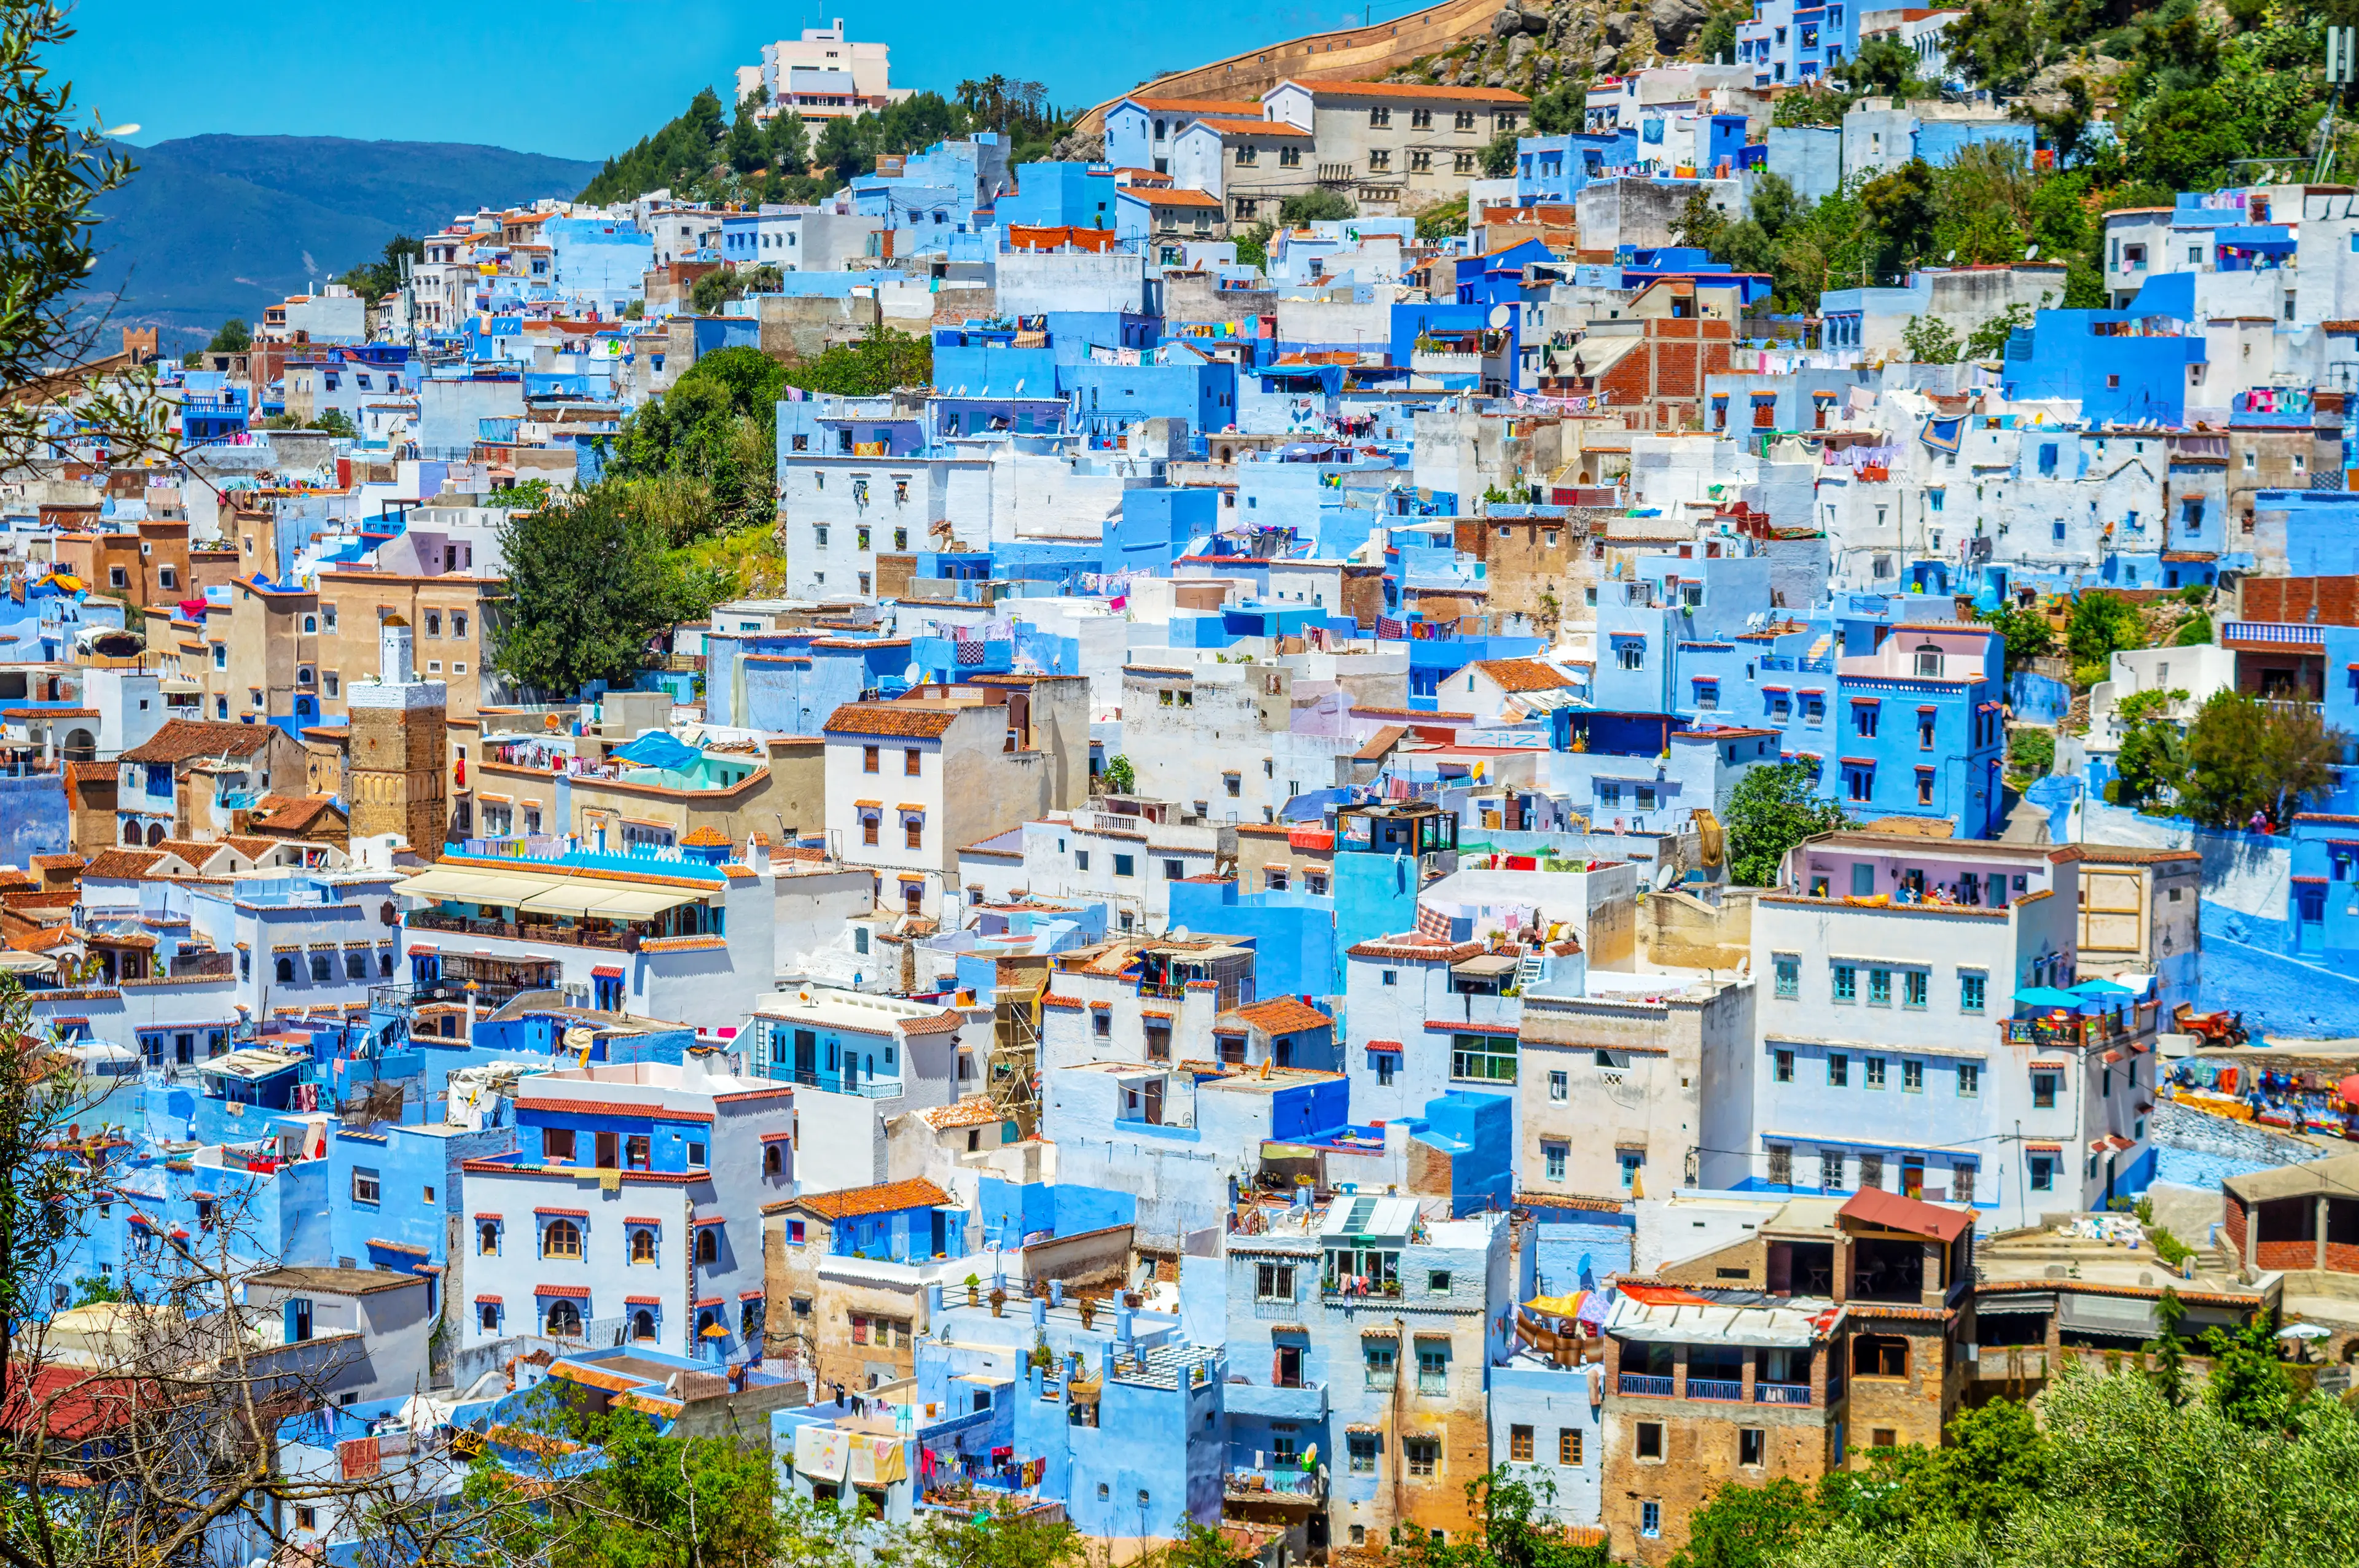 2-Day Adventure Guide to Chefchaouen, Morocco